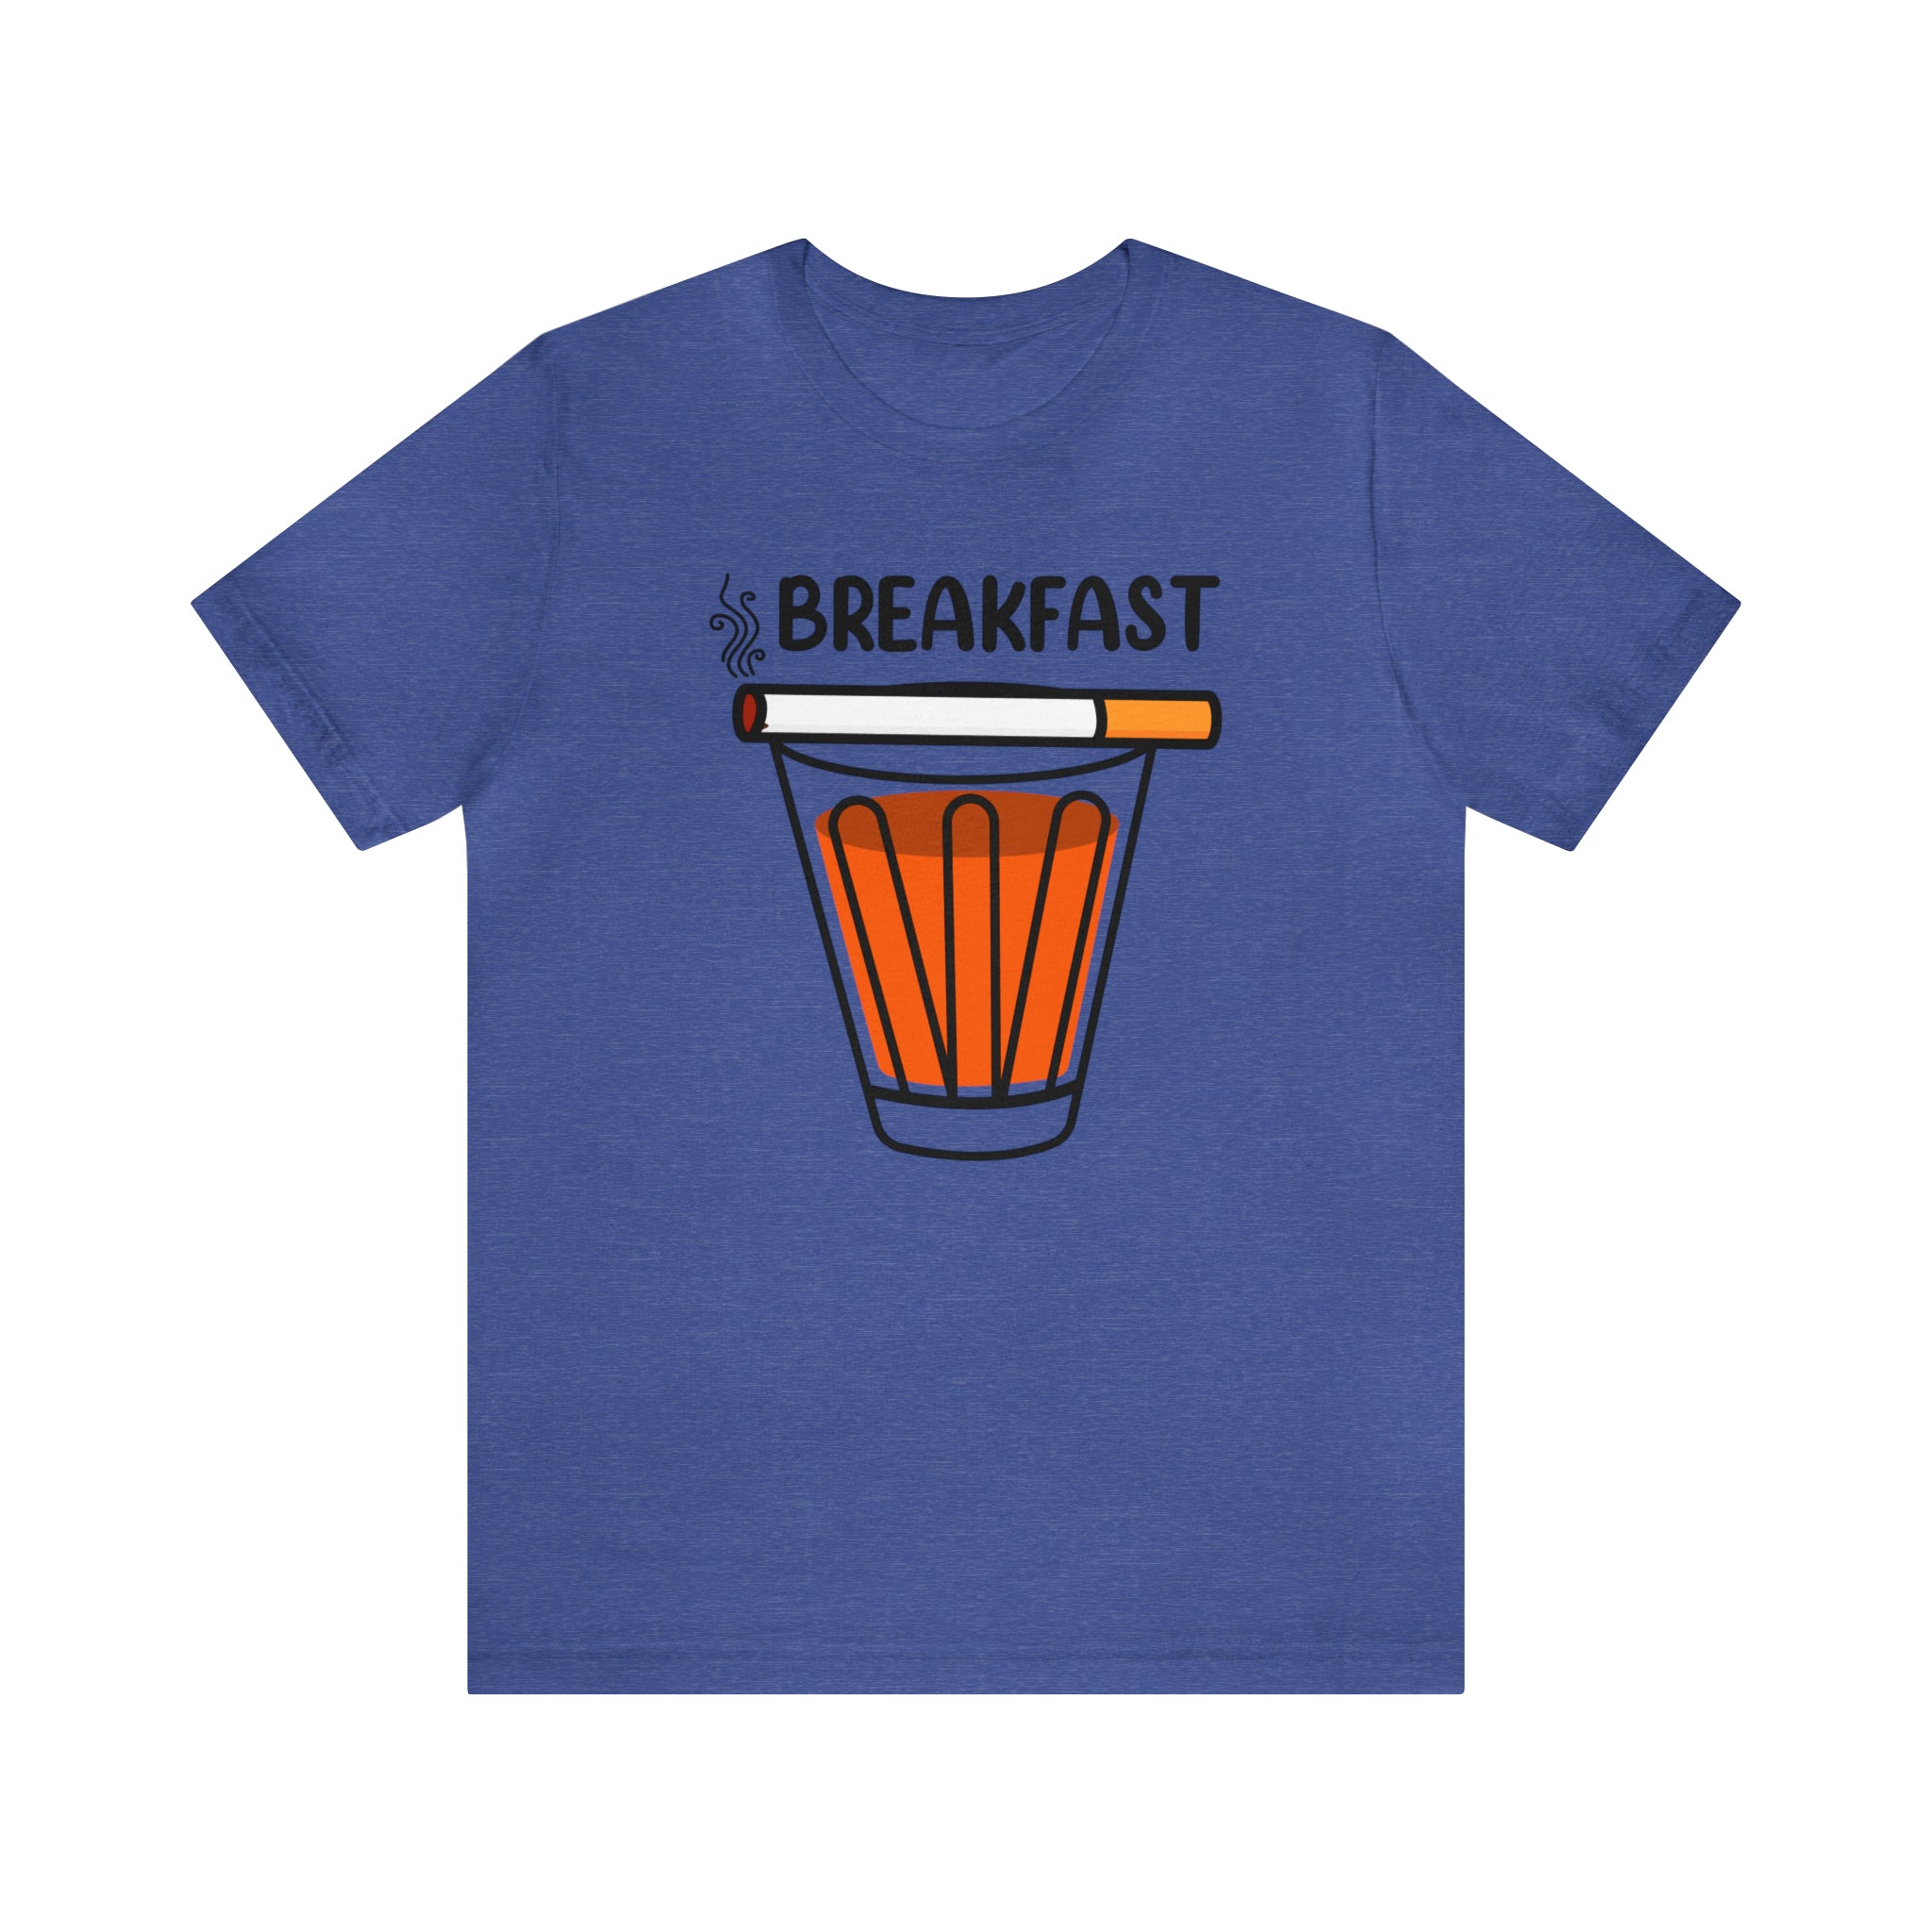 A foodie-inspired Breakfast T-shirt with the word breakfast on it.